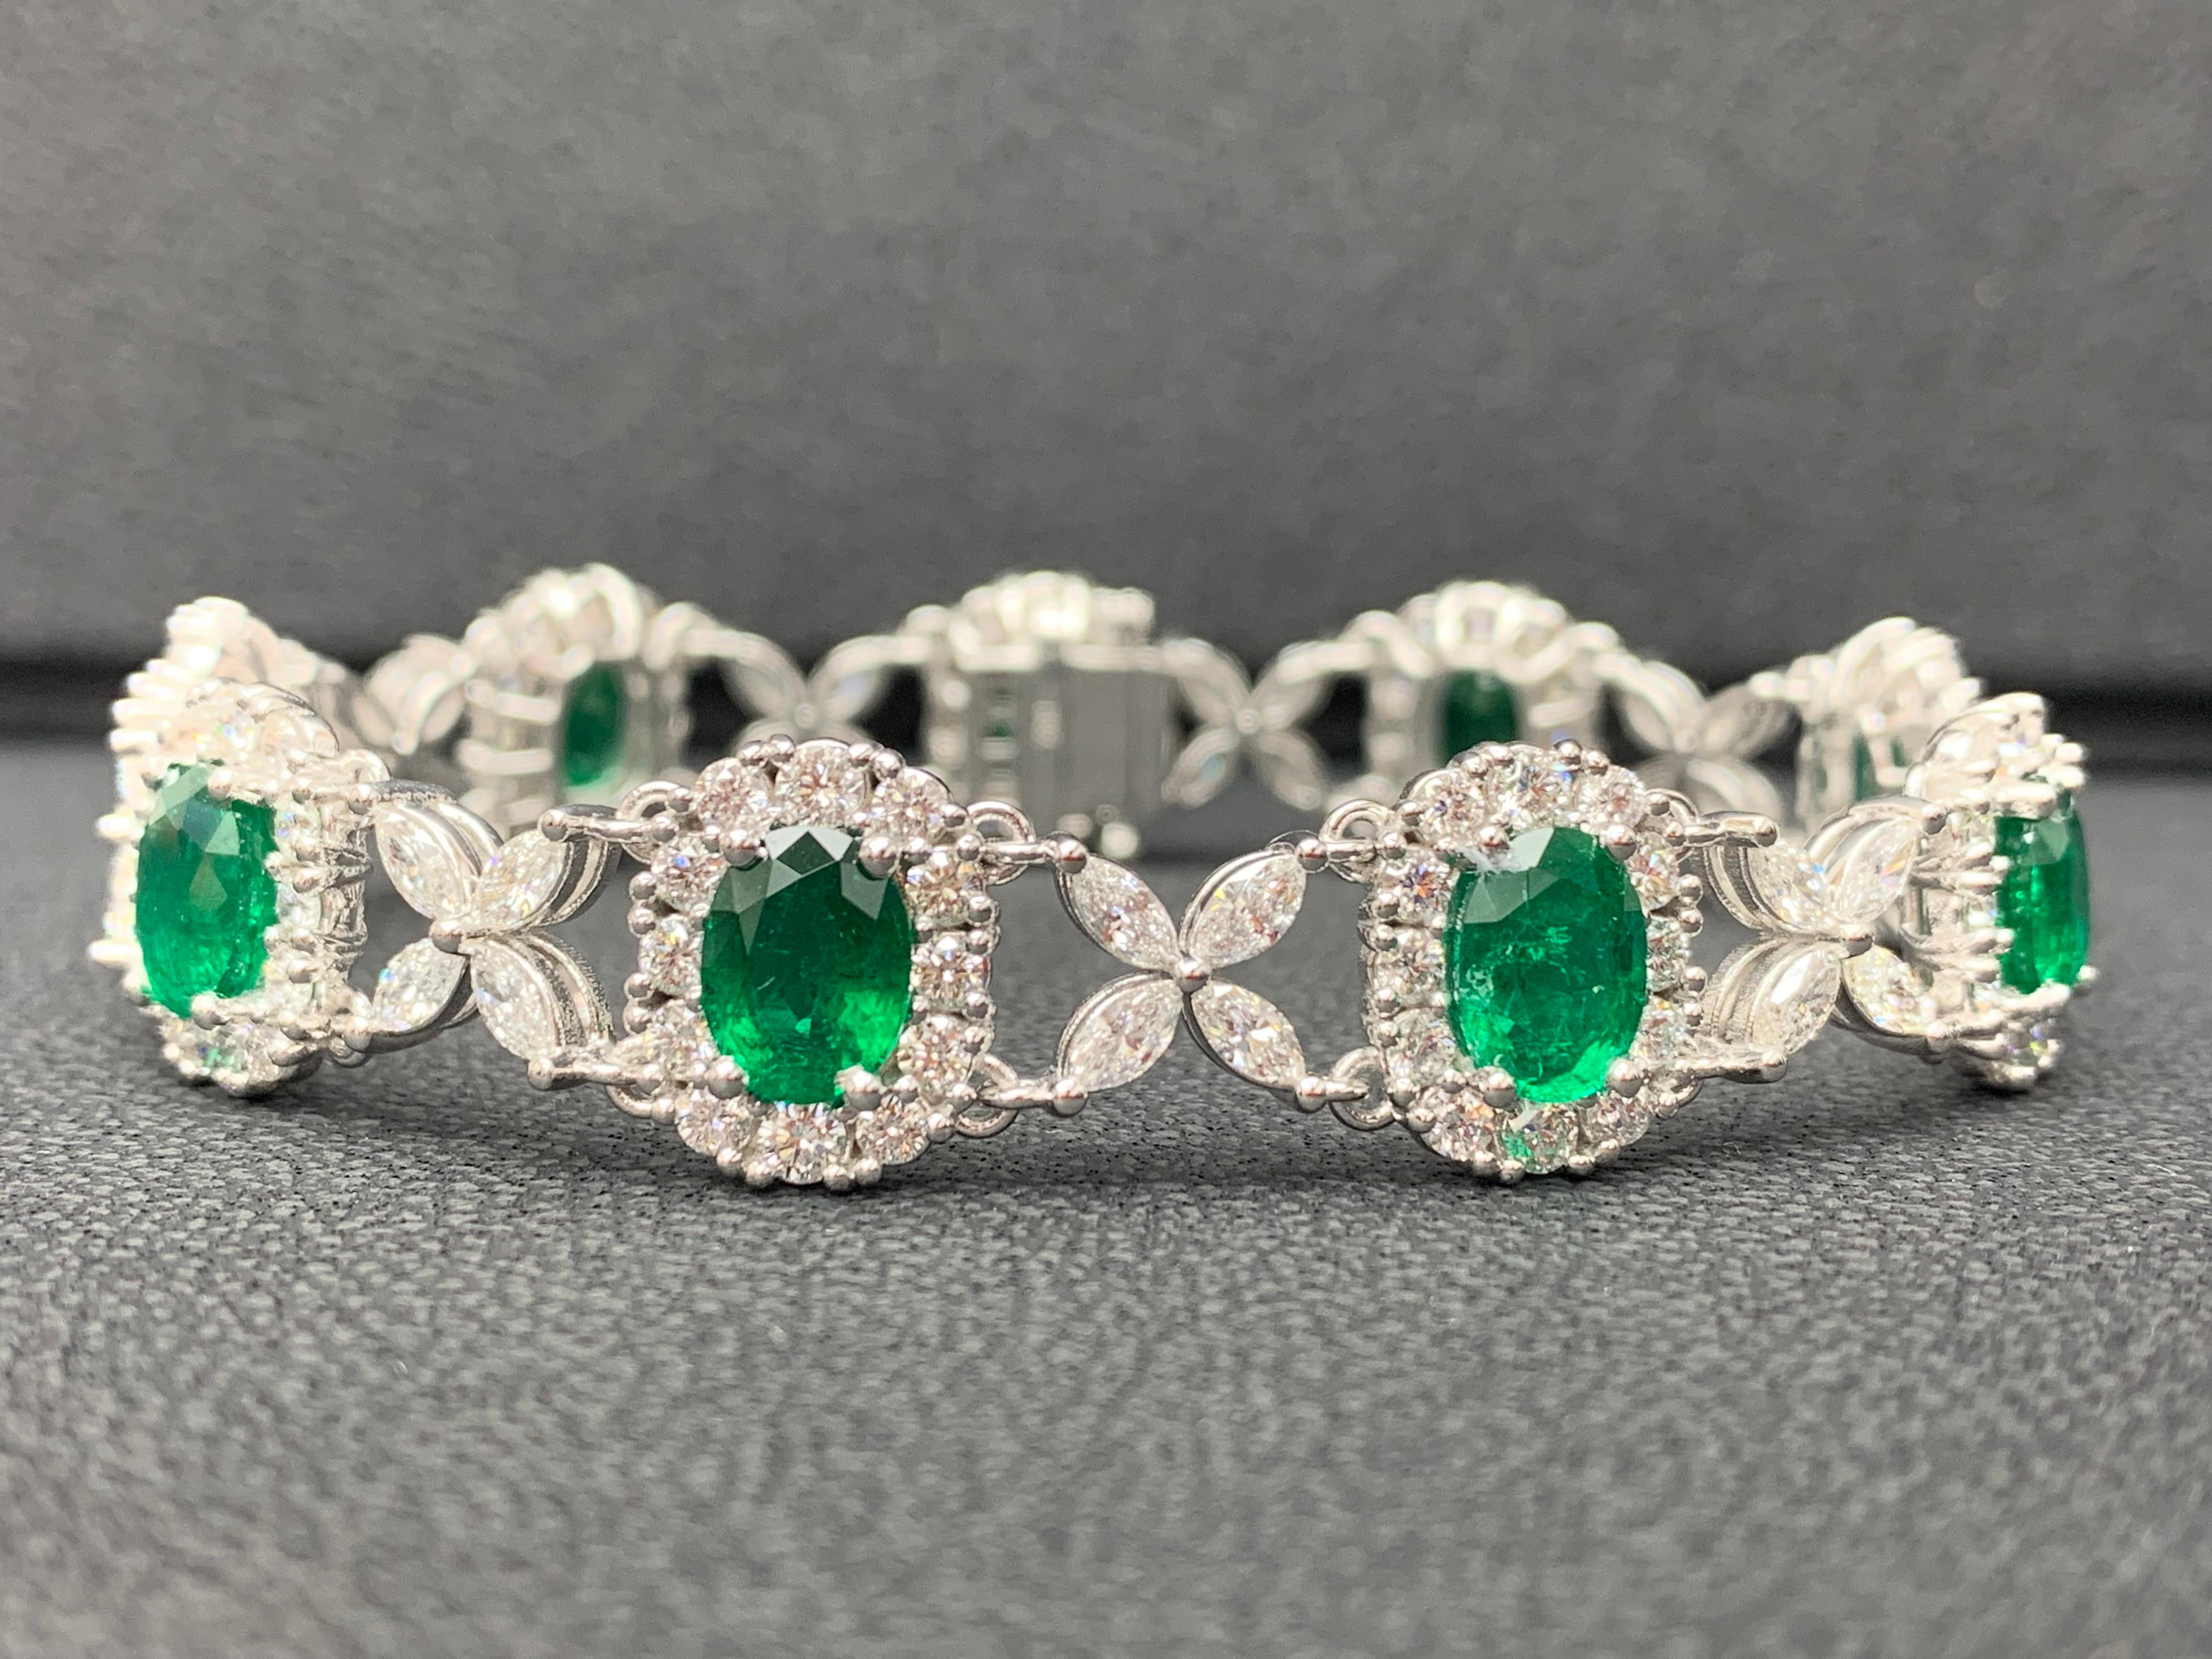 10.52 Carat Oval Cut Emerald and Diamond Tennis Bracelet in 14K White Gold For Sale 3